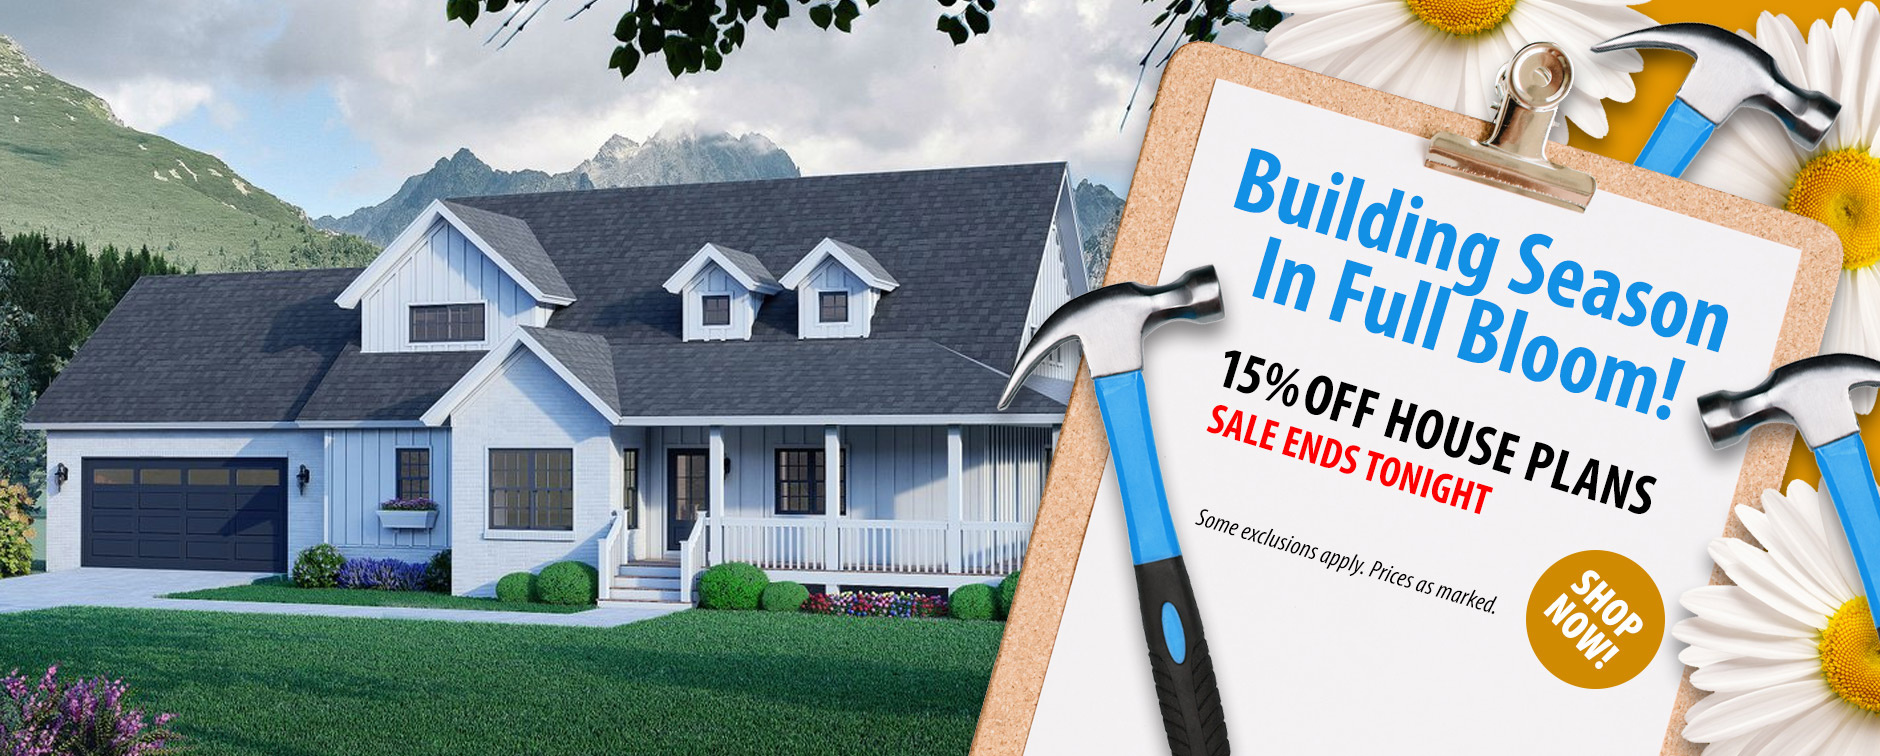 Get 15% Off Dream House Plans - Farmhouse, Modern, More - Event Ends Tonight